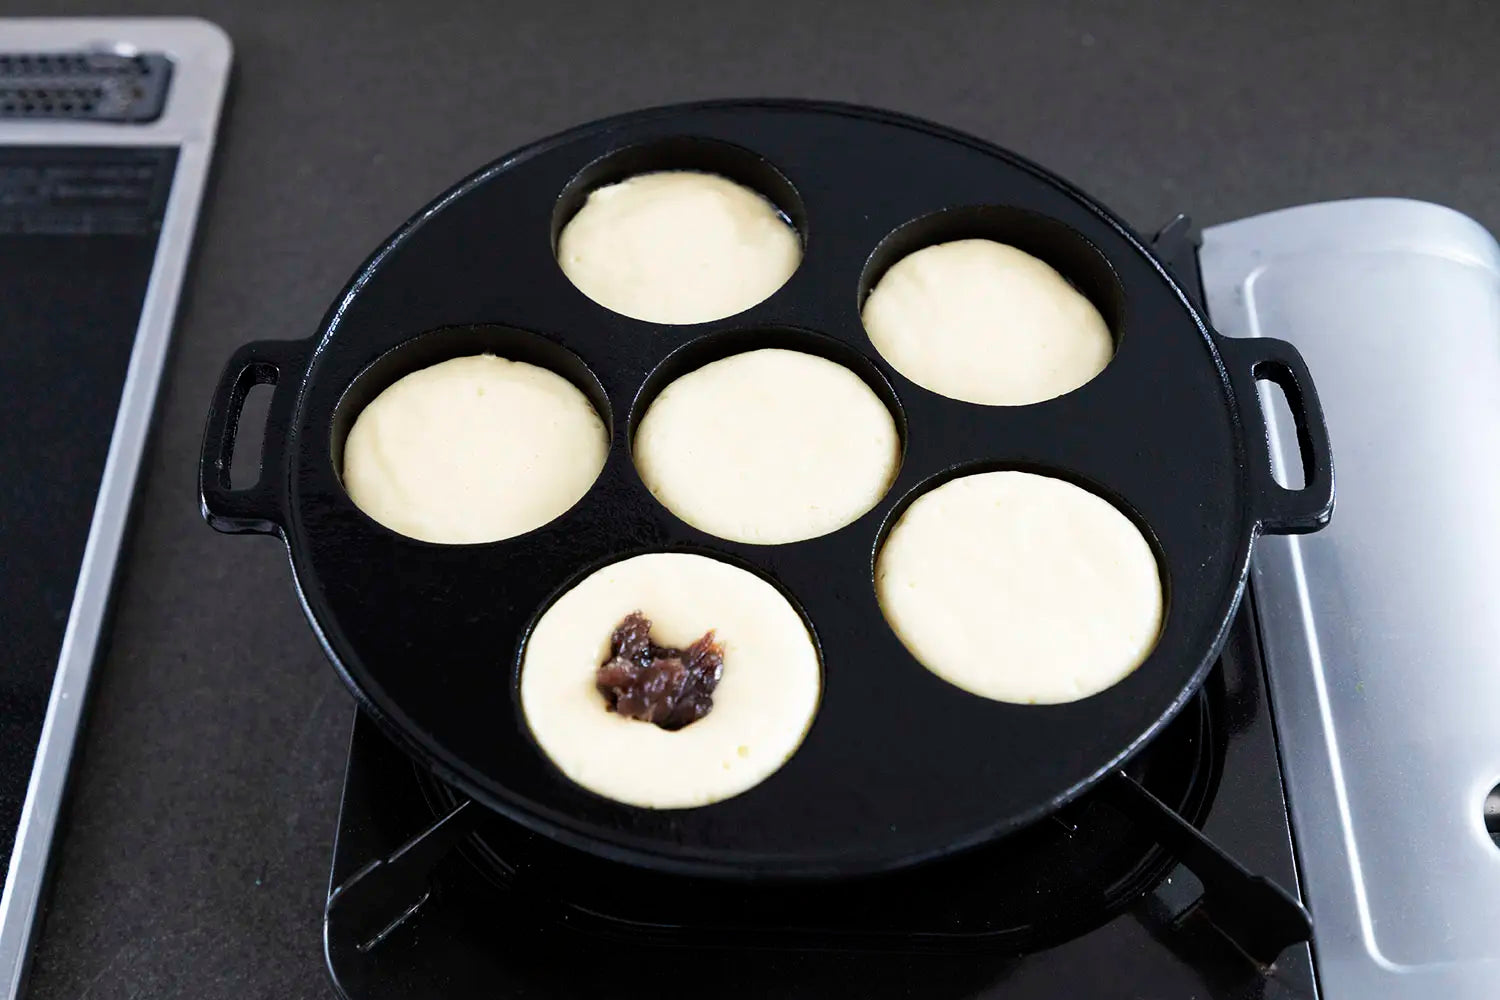 Obanyaki Pan with batter and filling